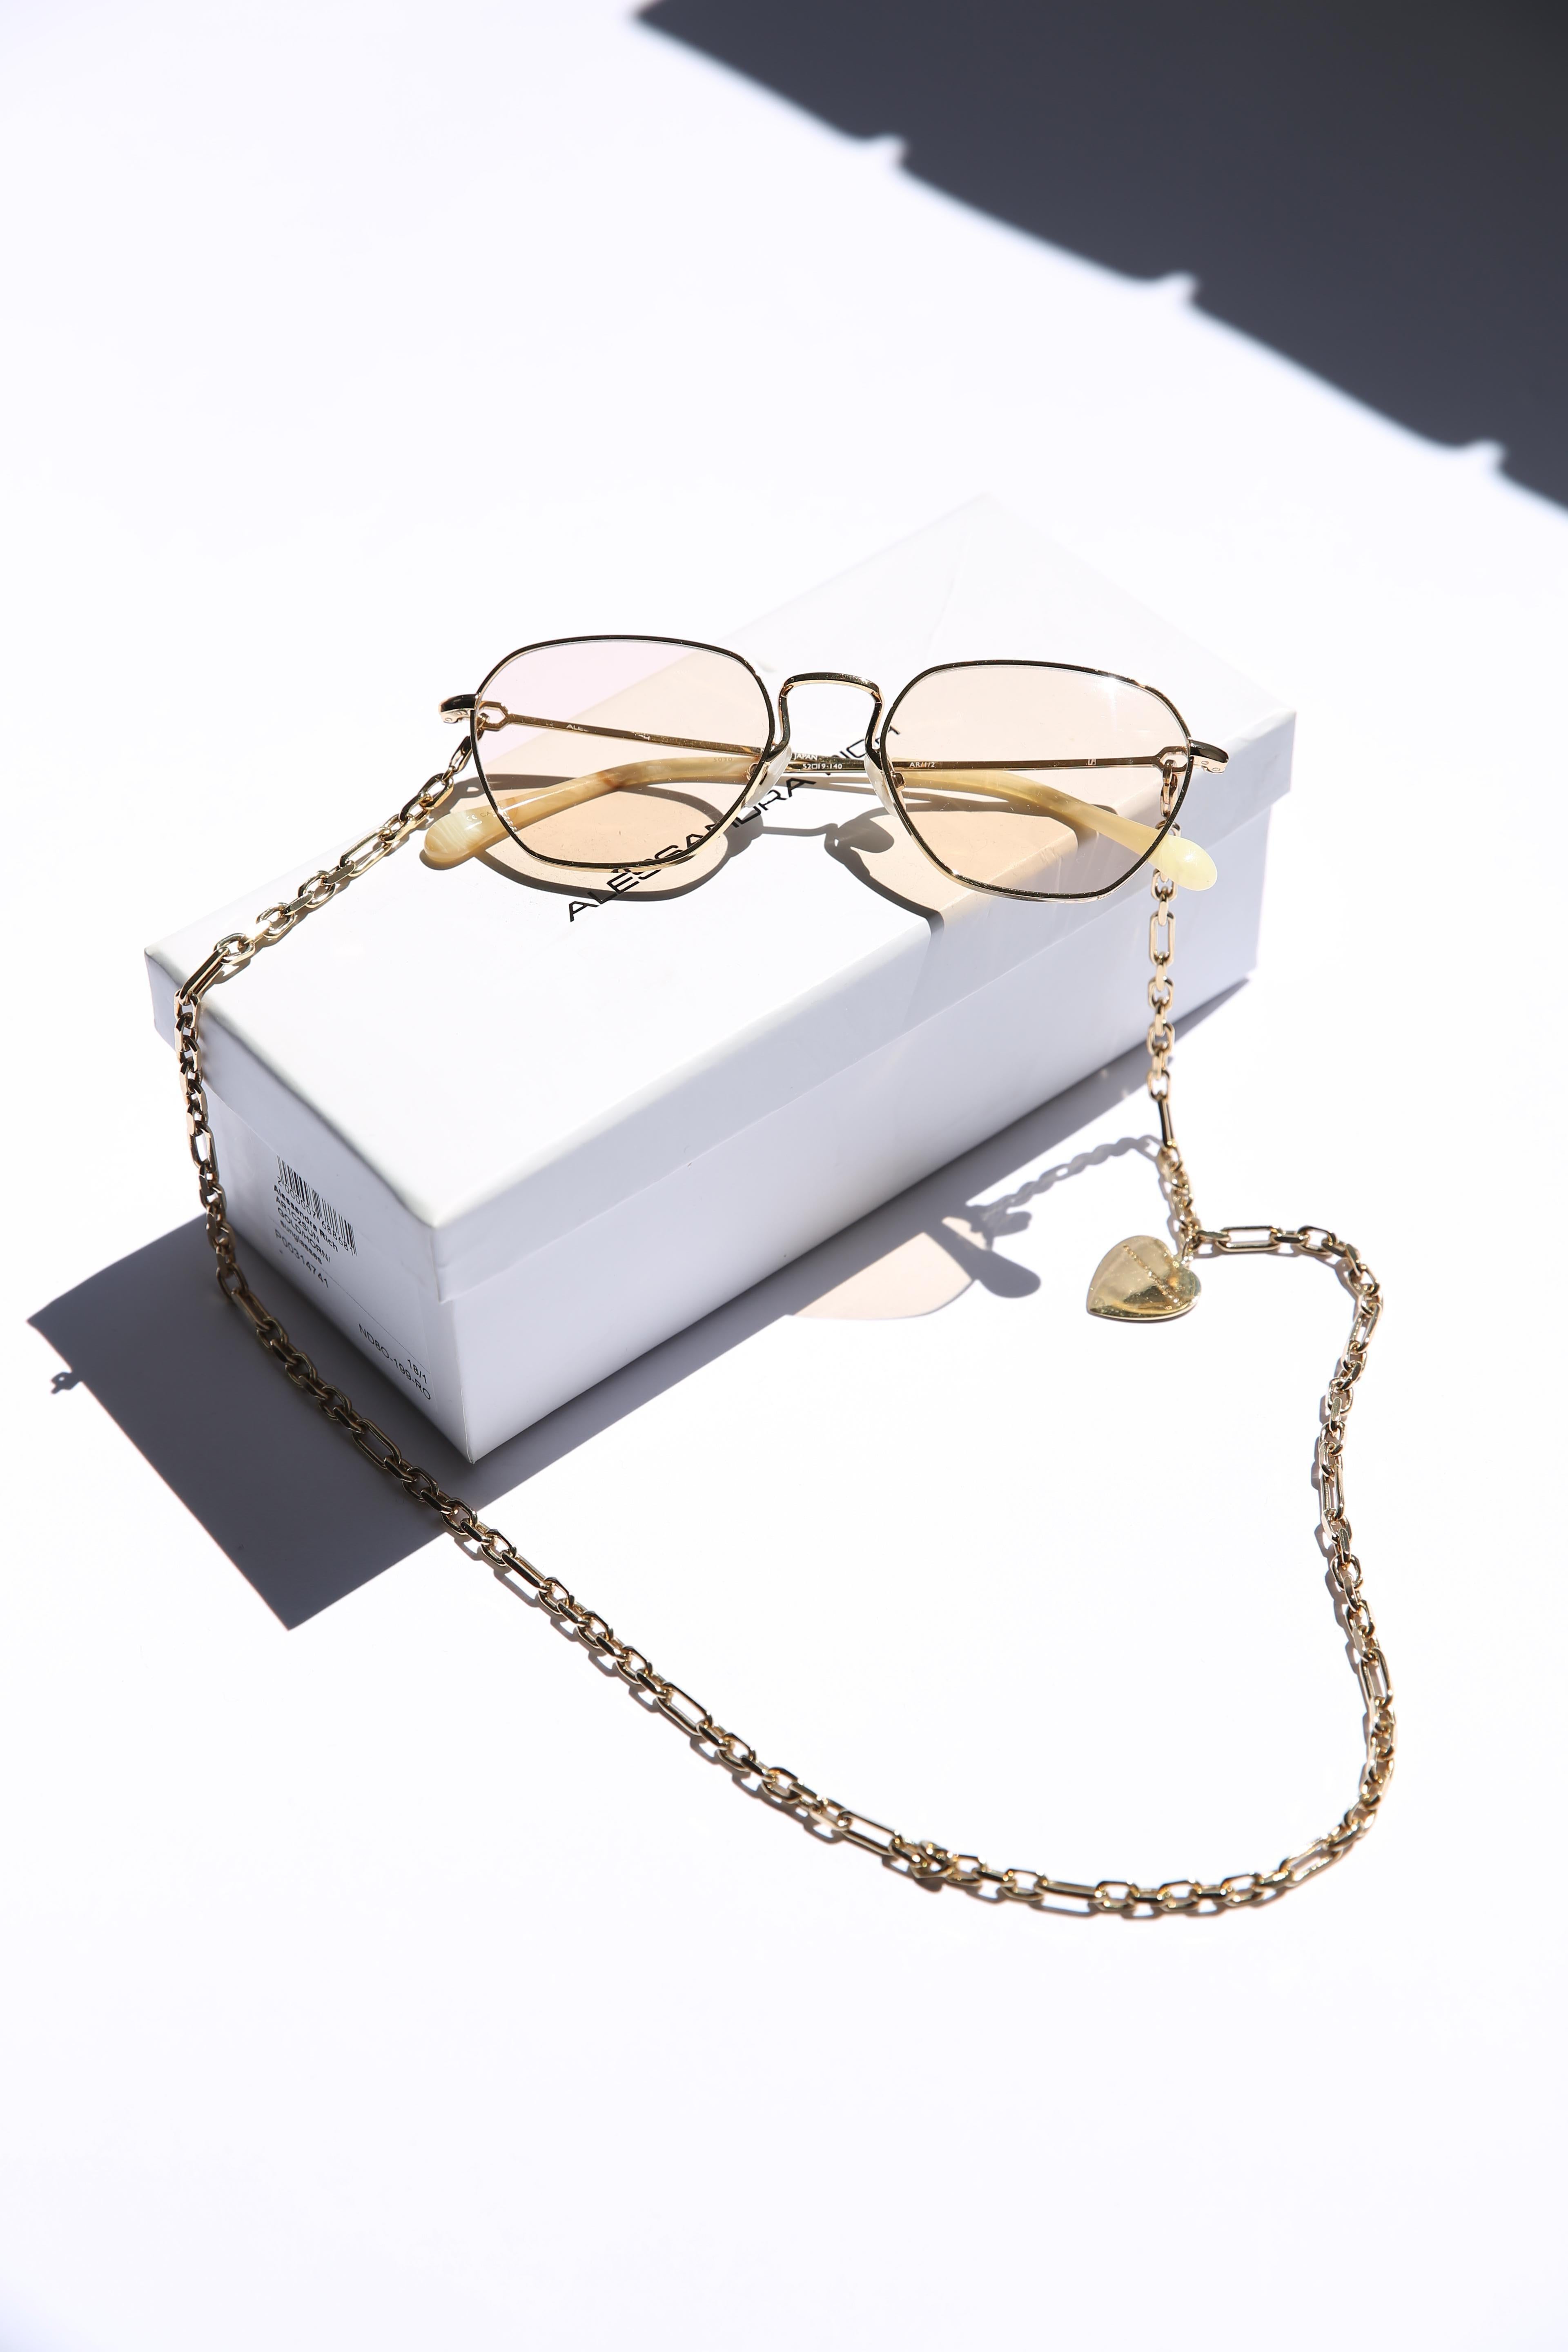 Alessandra Rich 1 C2 pink and yellow gold rectangular sunglasses with gold heart embellished chain

Charming collaboration designer Alessandra Rich's SS18 collection that perfectly balanced fine fabrics and chic silhouettes with kitschy details. The